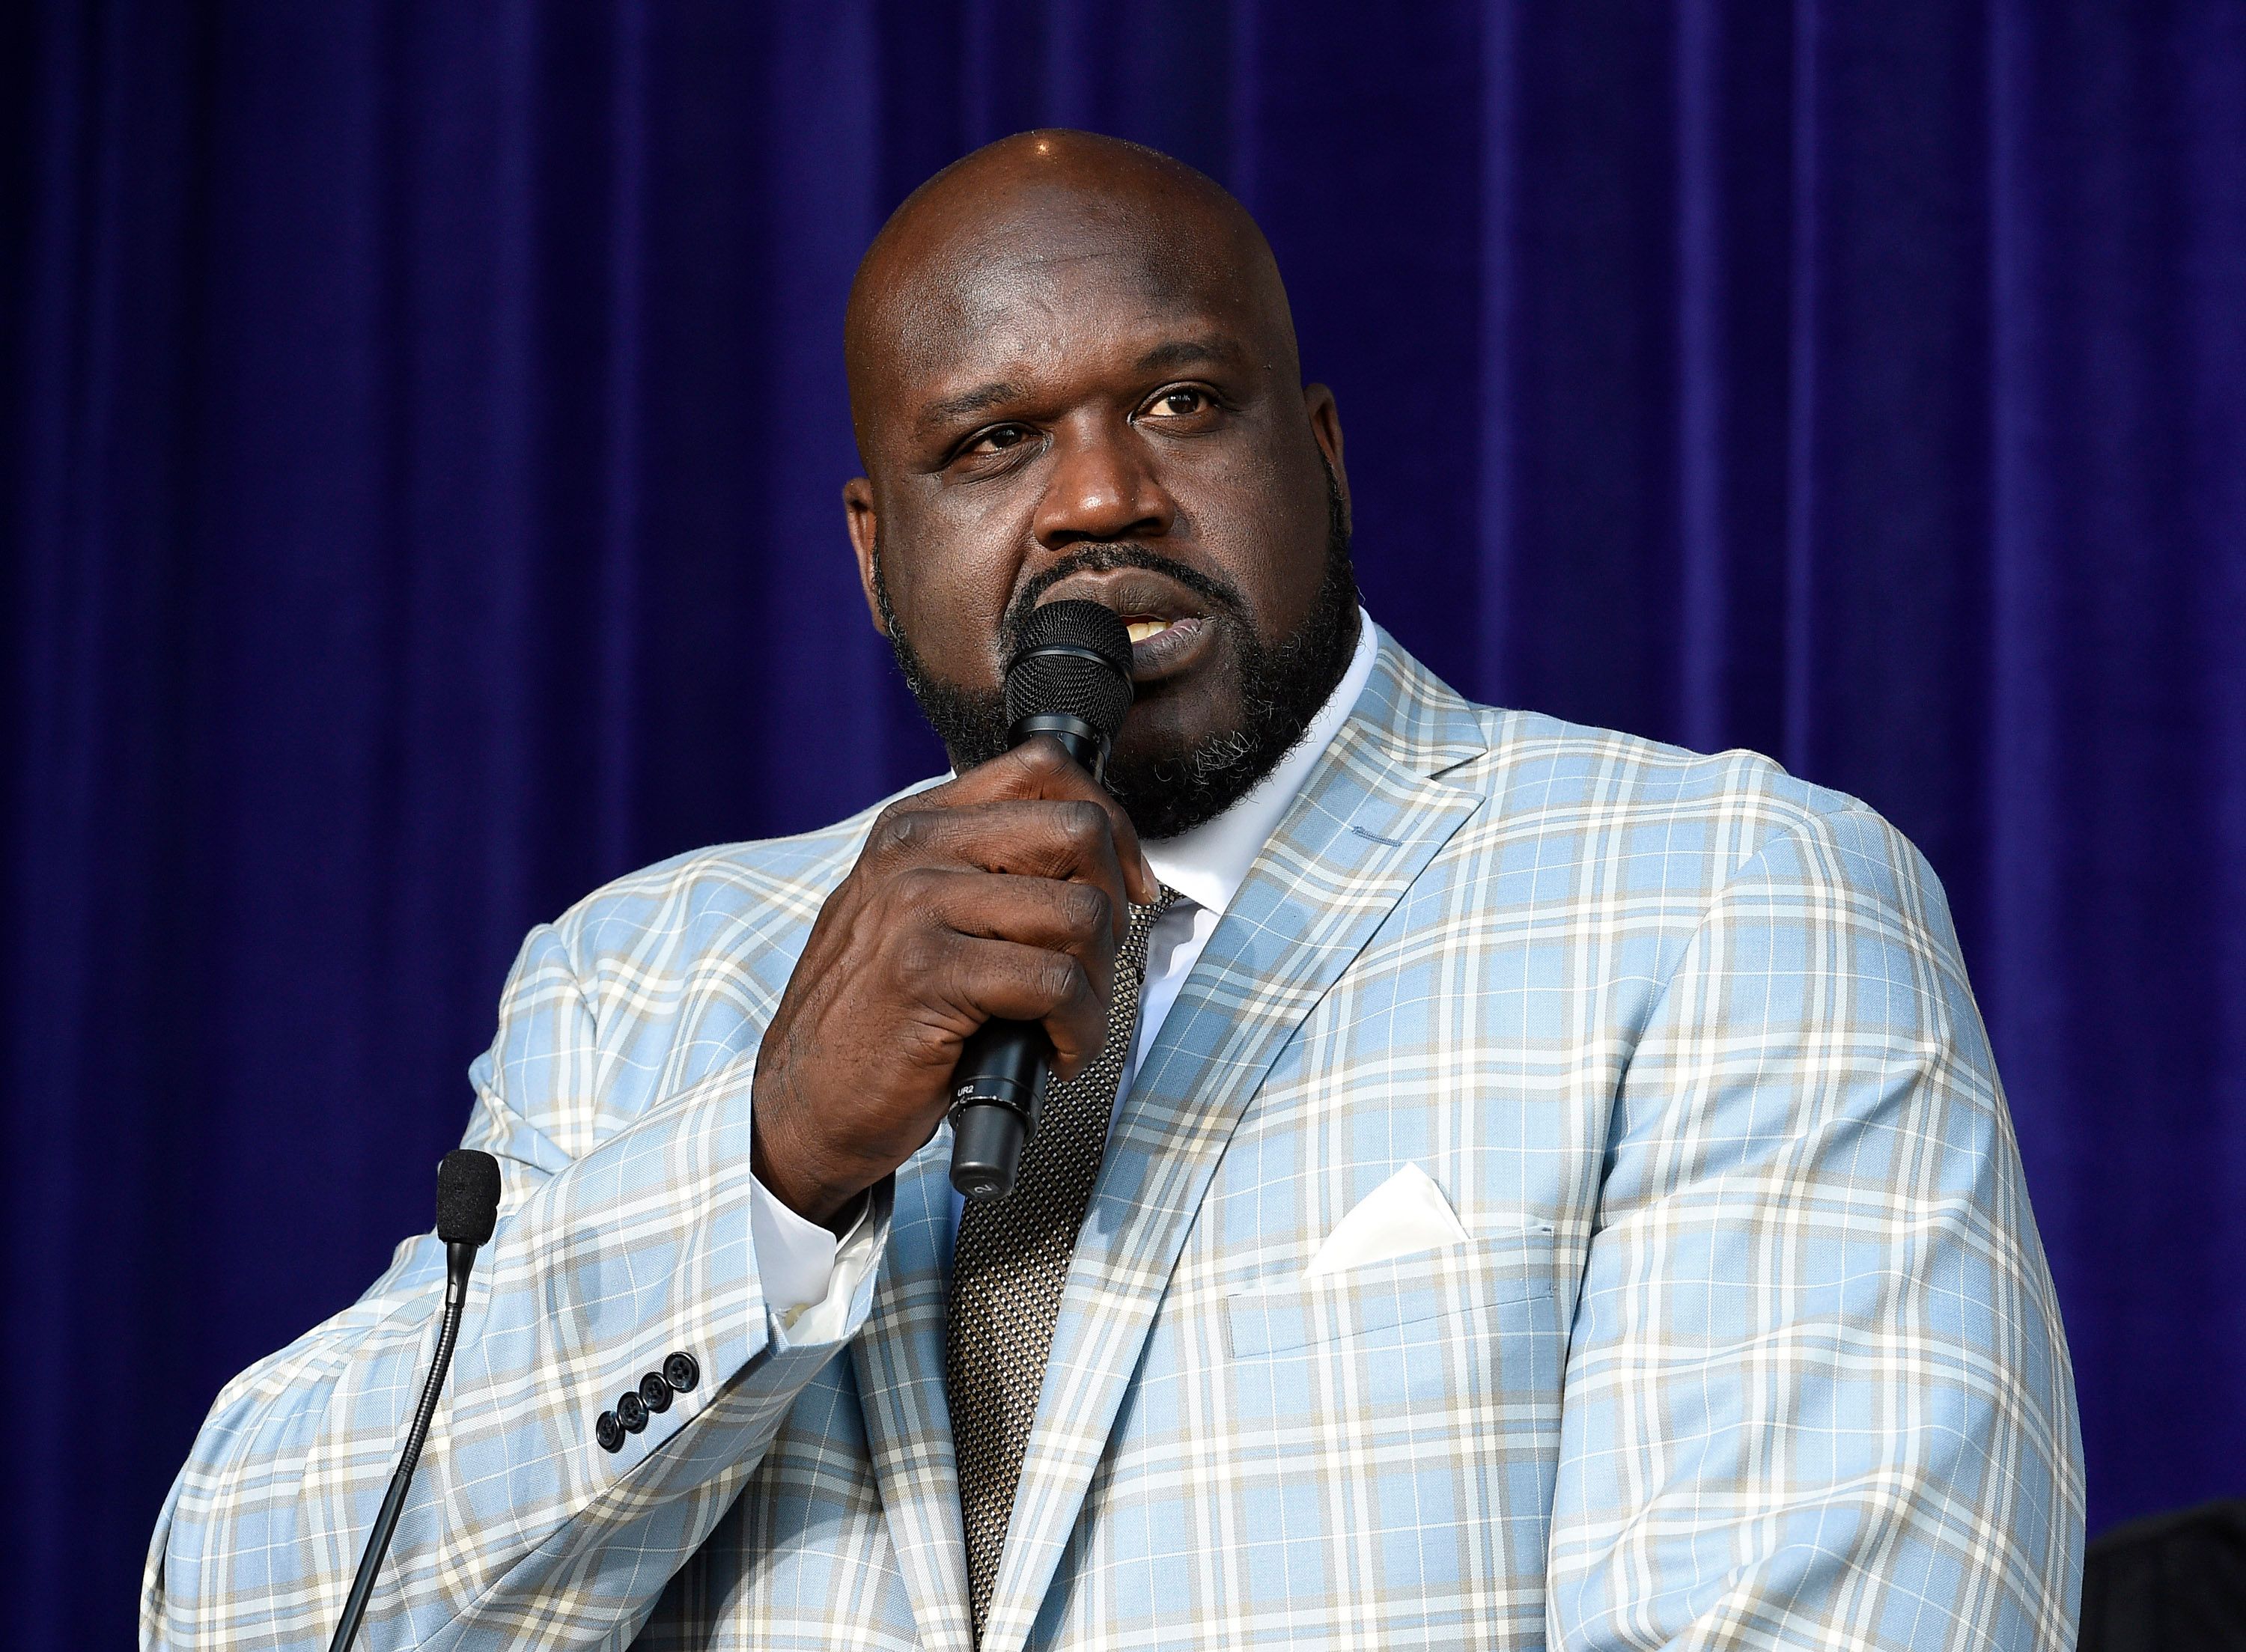 Shaquille O'Neal speaks after unveiling of his statue at Staples Center March 24, 2017, in Los Angeles, California. | Source: Getty Images